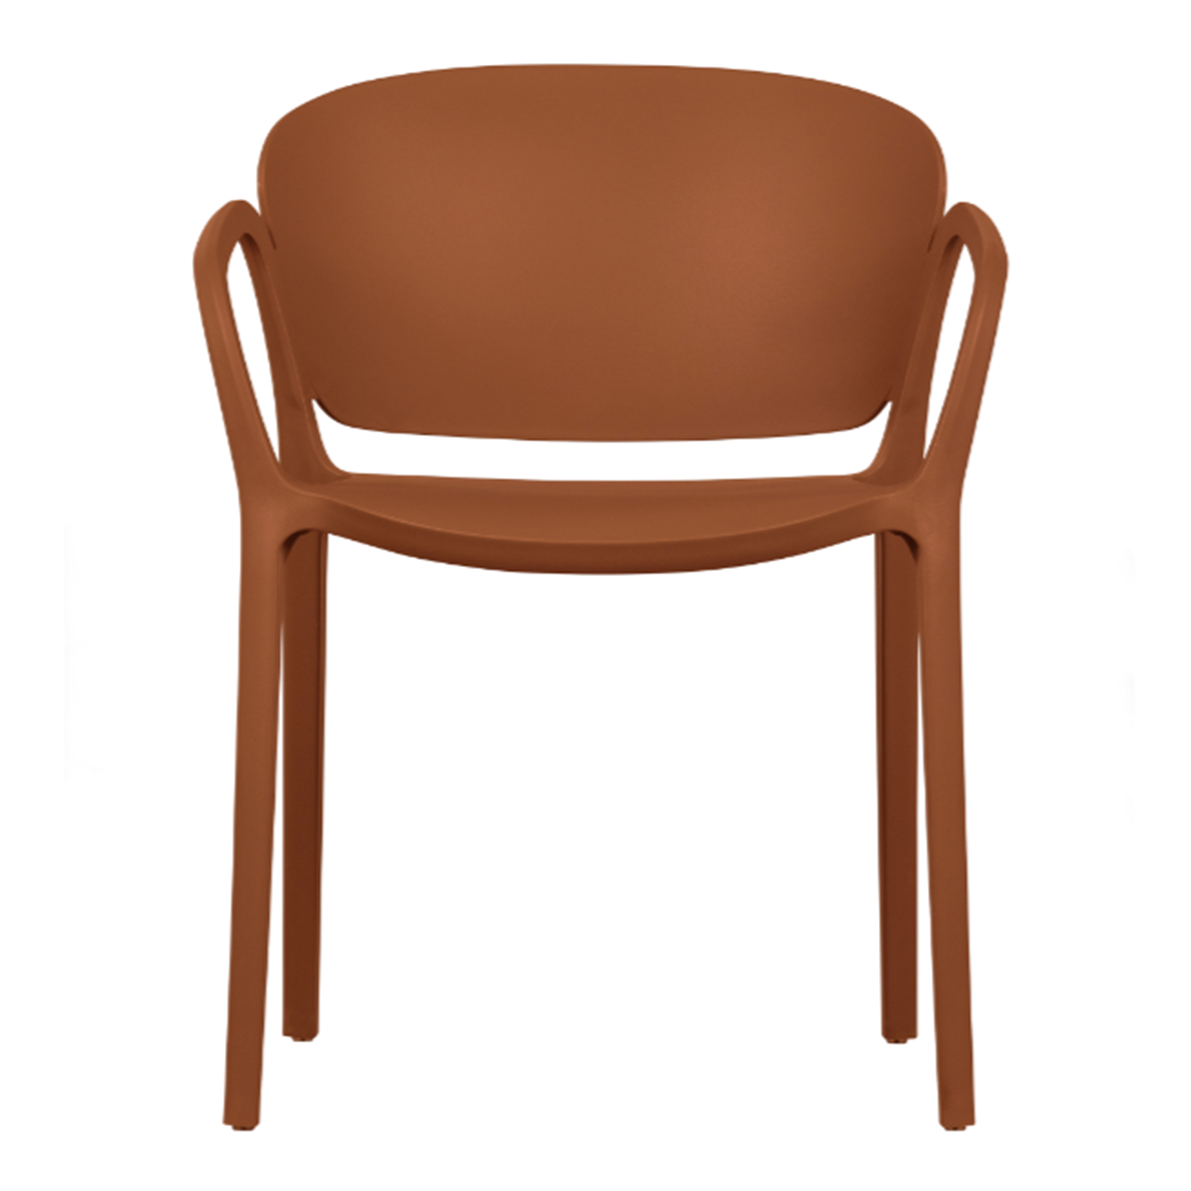 BENT OUTDOOR DINING CHAIR 1